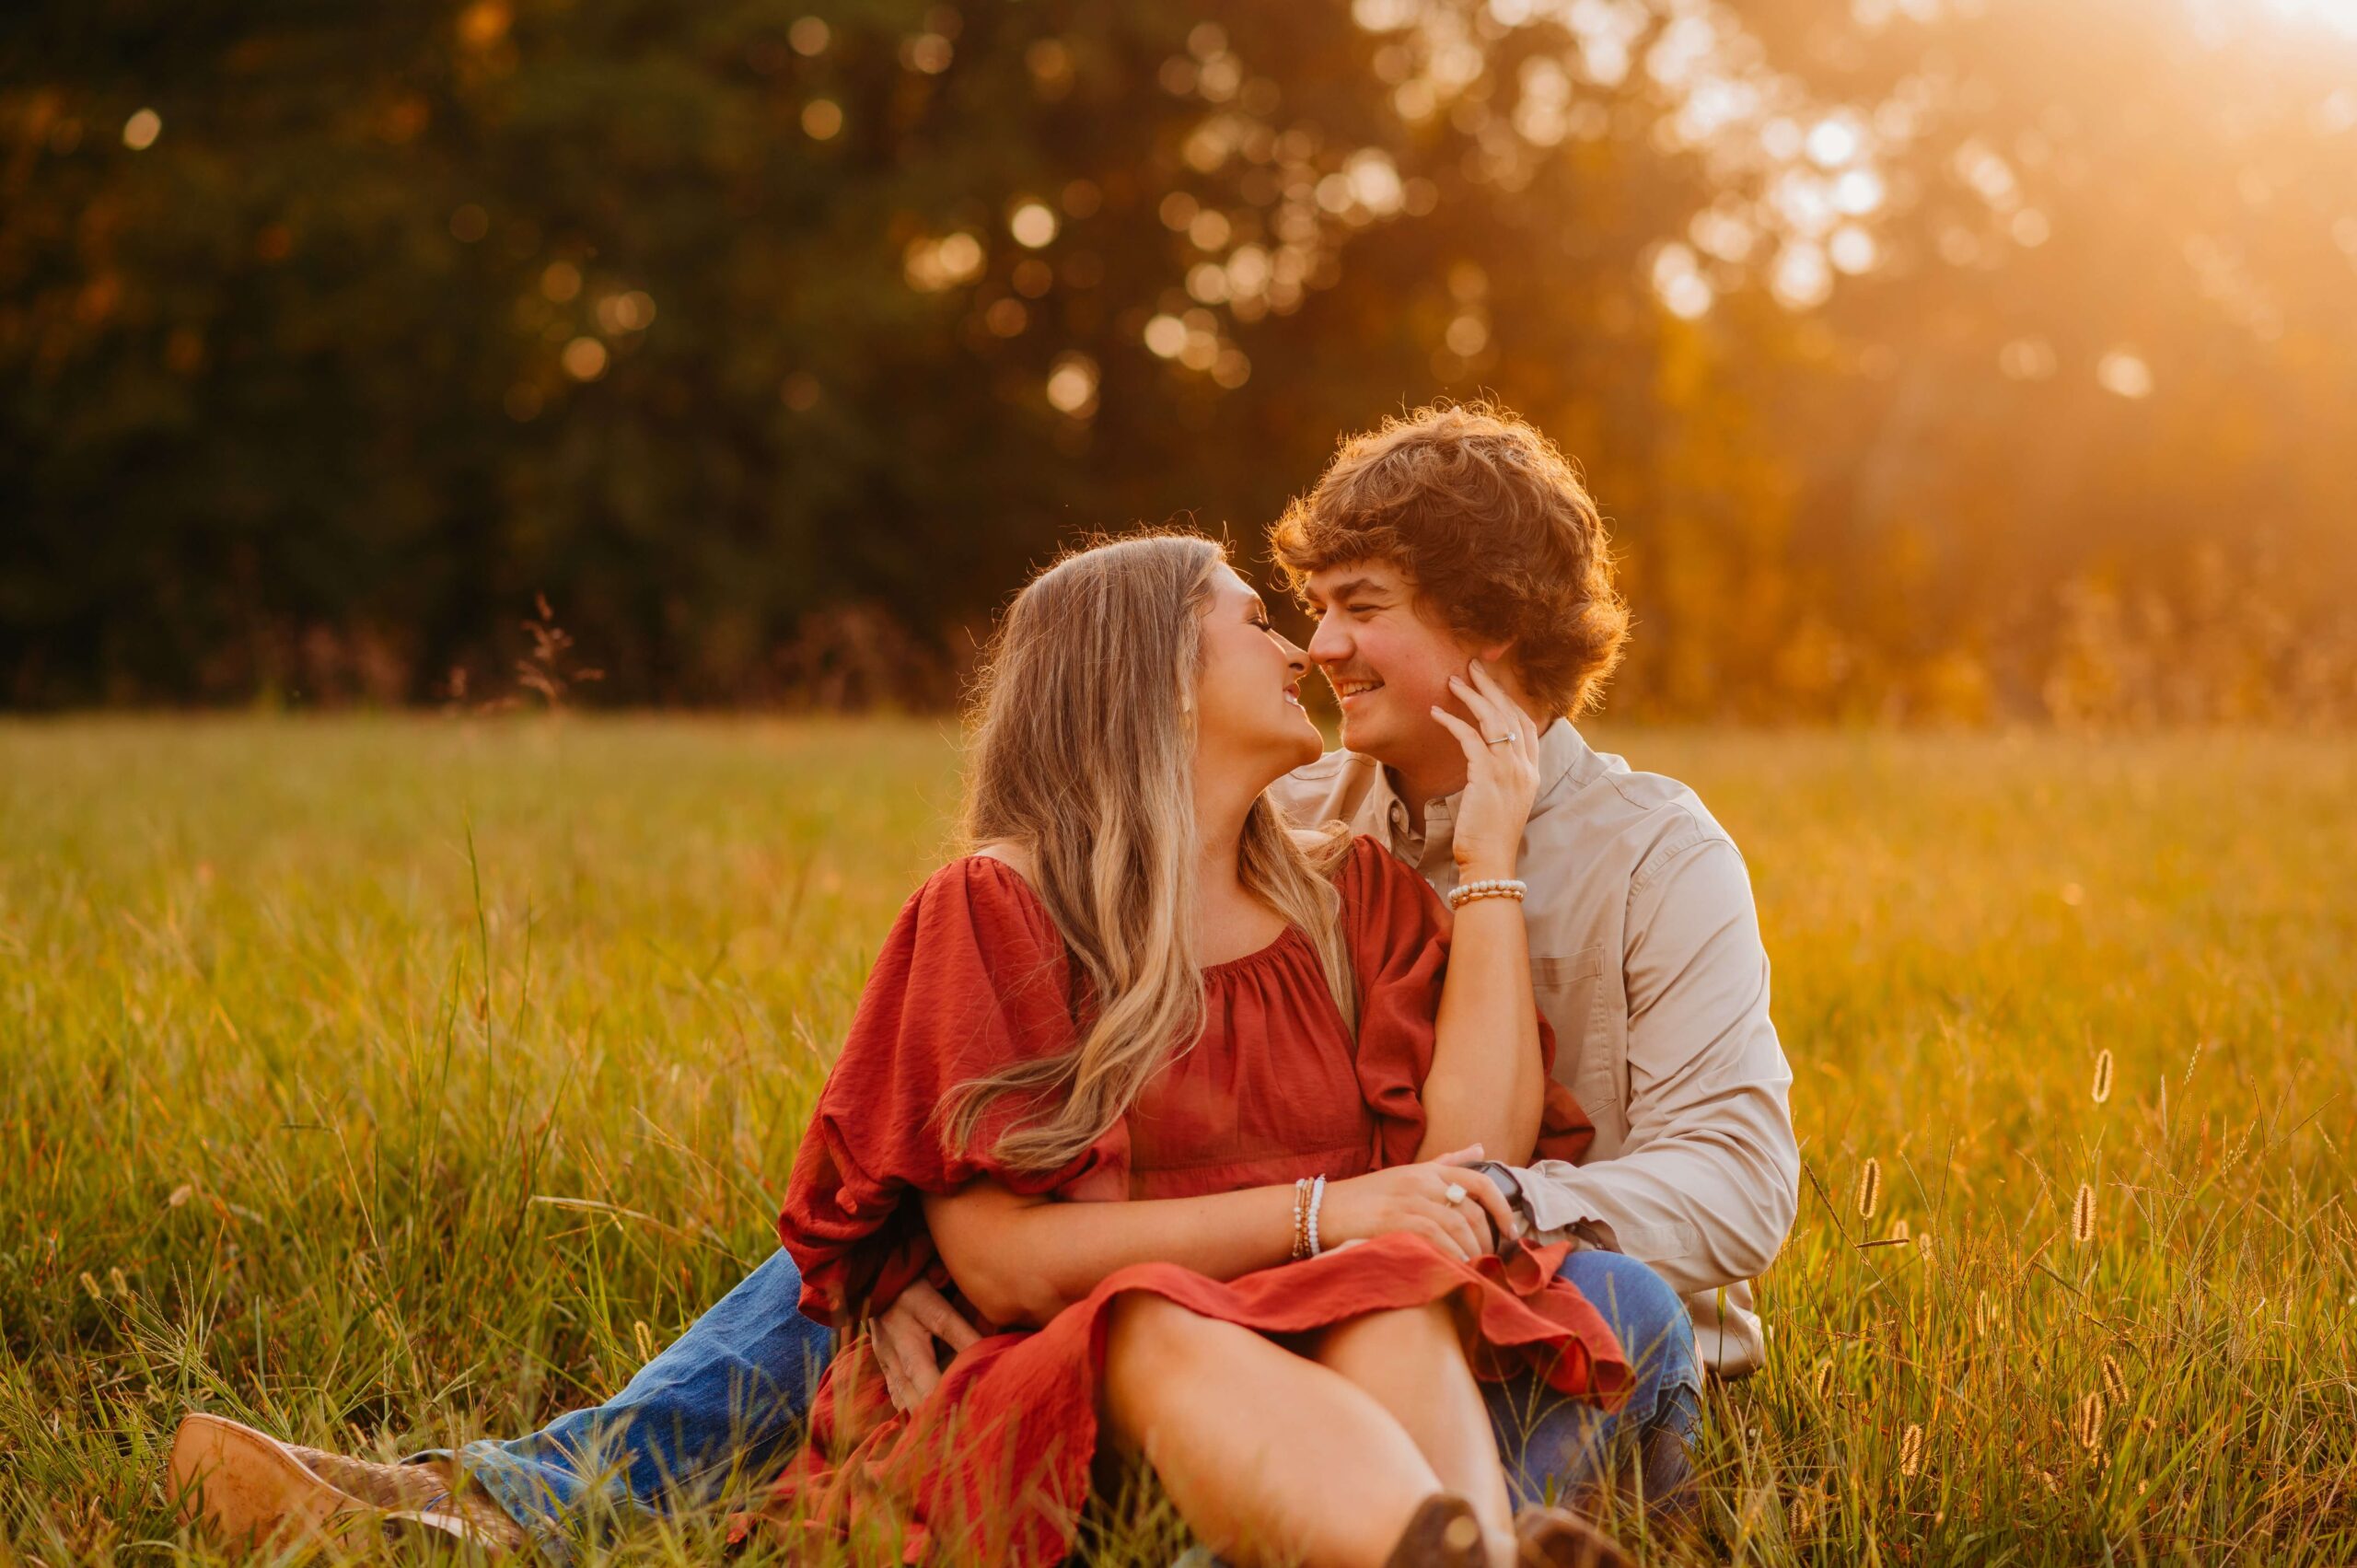 woman caressing her fiance's face as they sit in a field